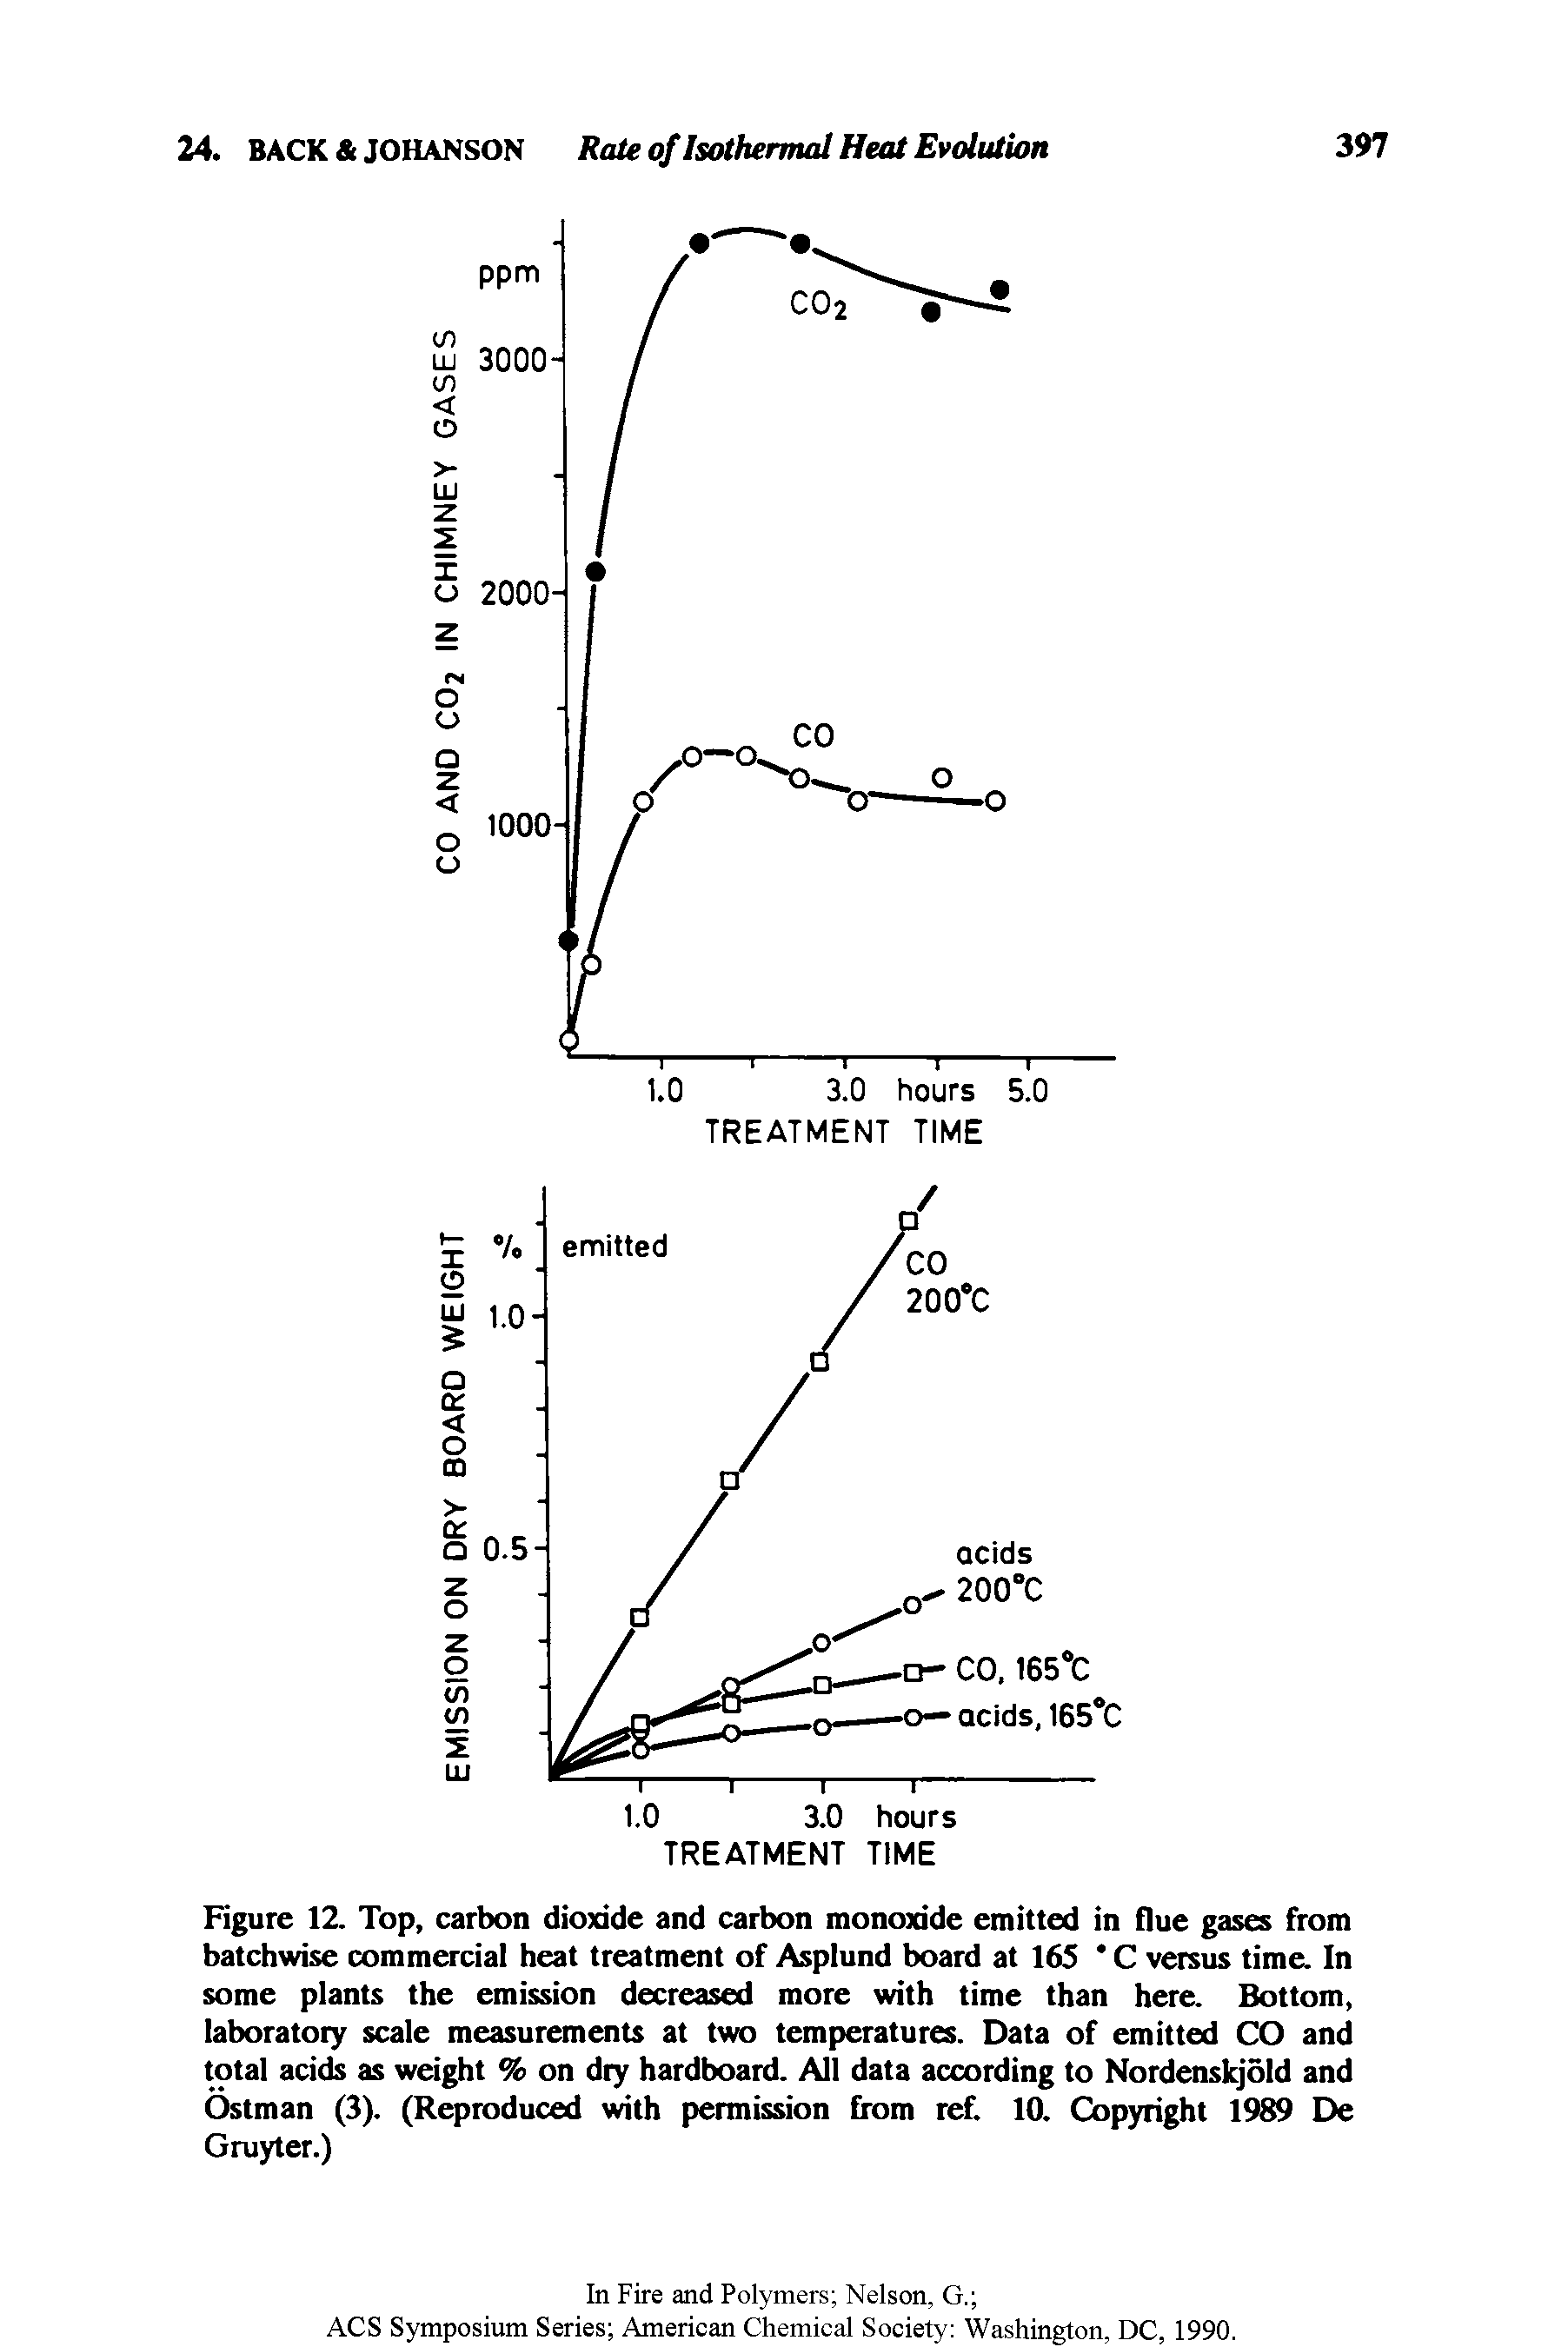 Figure 12. Top, carbon dioxide and carbon monoxide emitted in flue gases from batchwise commercial heat treatment of Asplund board at 165 C versus time. In some plants the emission decreased more with time than here. Bottom, laboratory scale measurements at two temperatures. Data of emitted CO and total acids as weight % on dry hardboard. All data according to Nordenskjold and Ostman (3). (Reproduced with permission from ref. 10. Copyright 1989 De Gruyter.)...